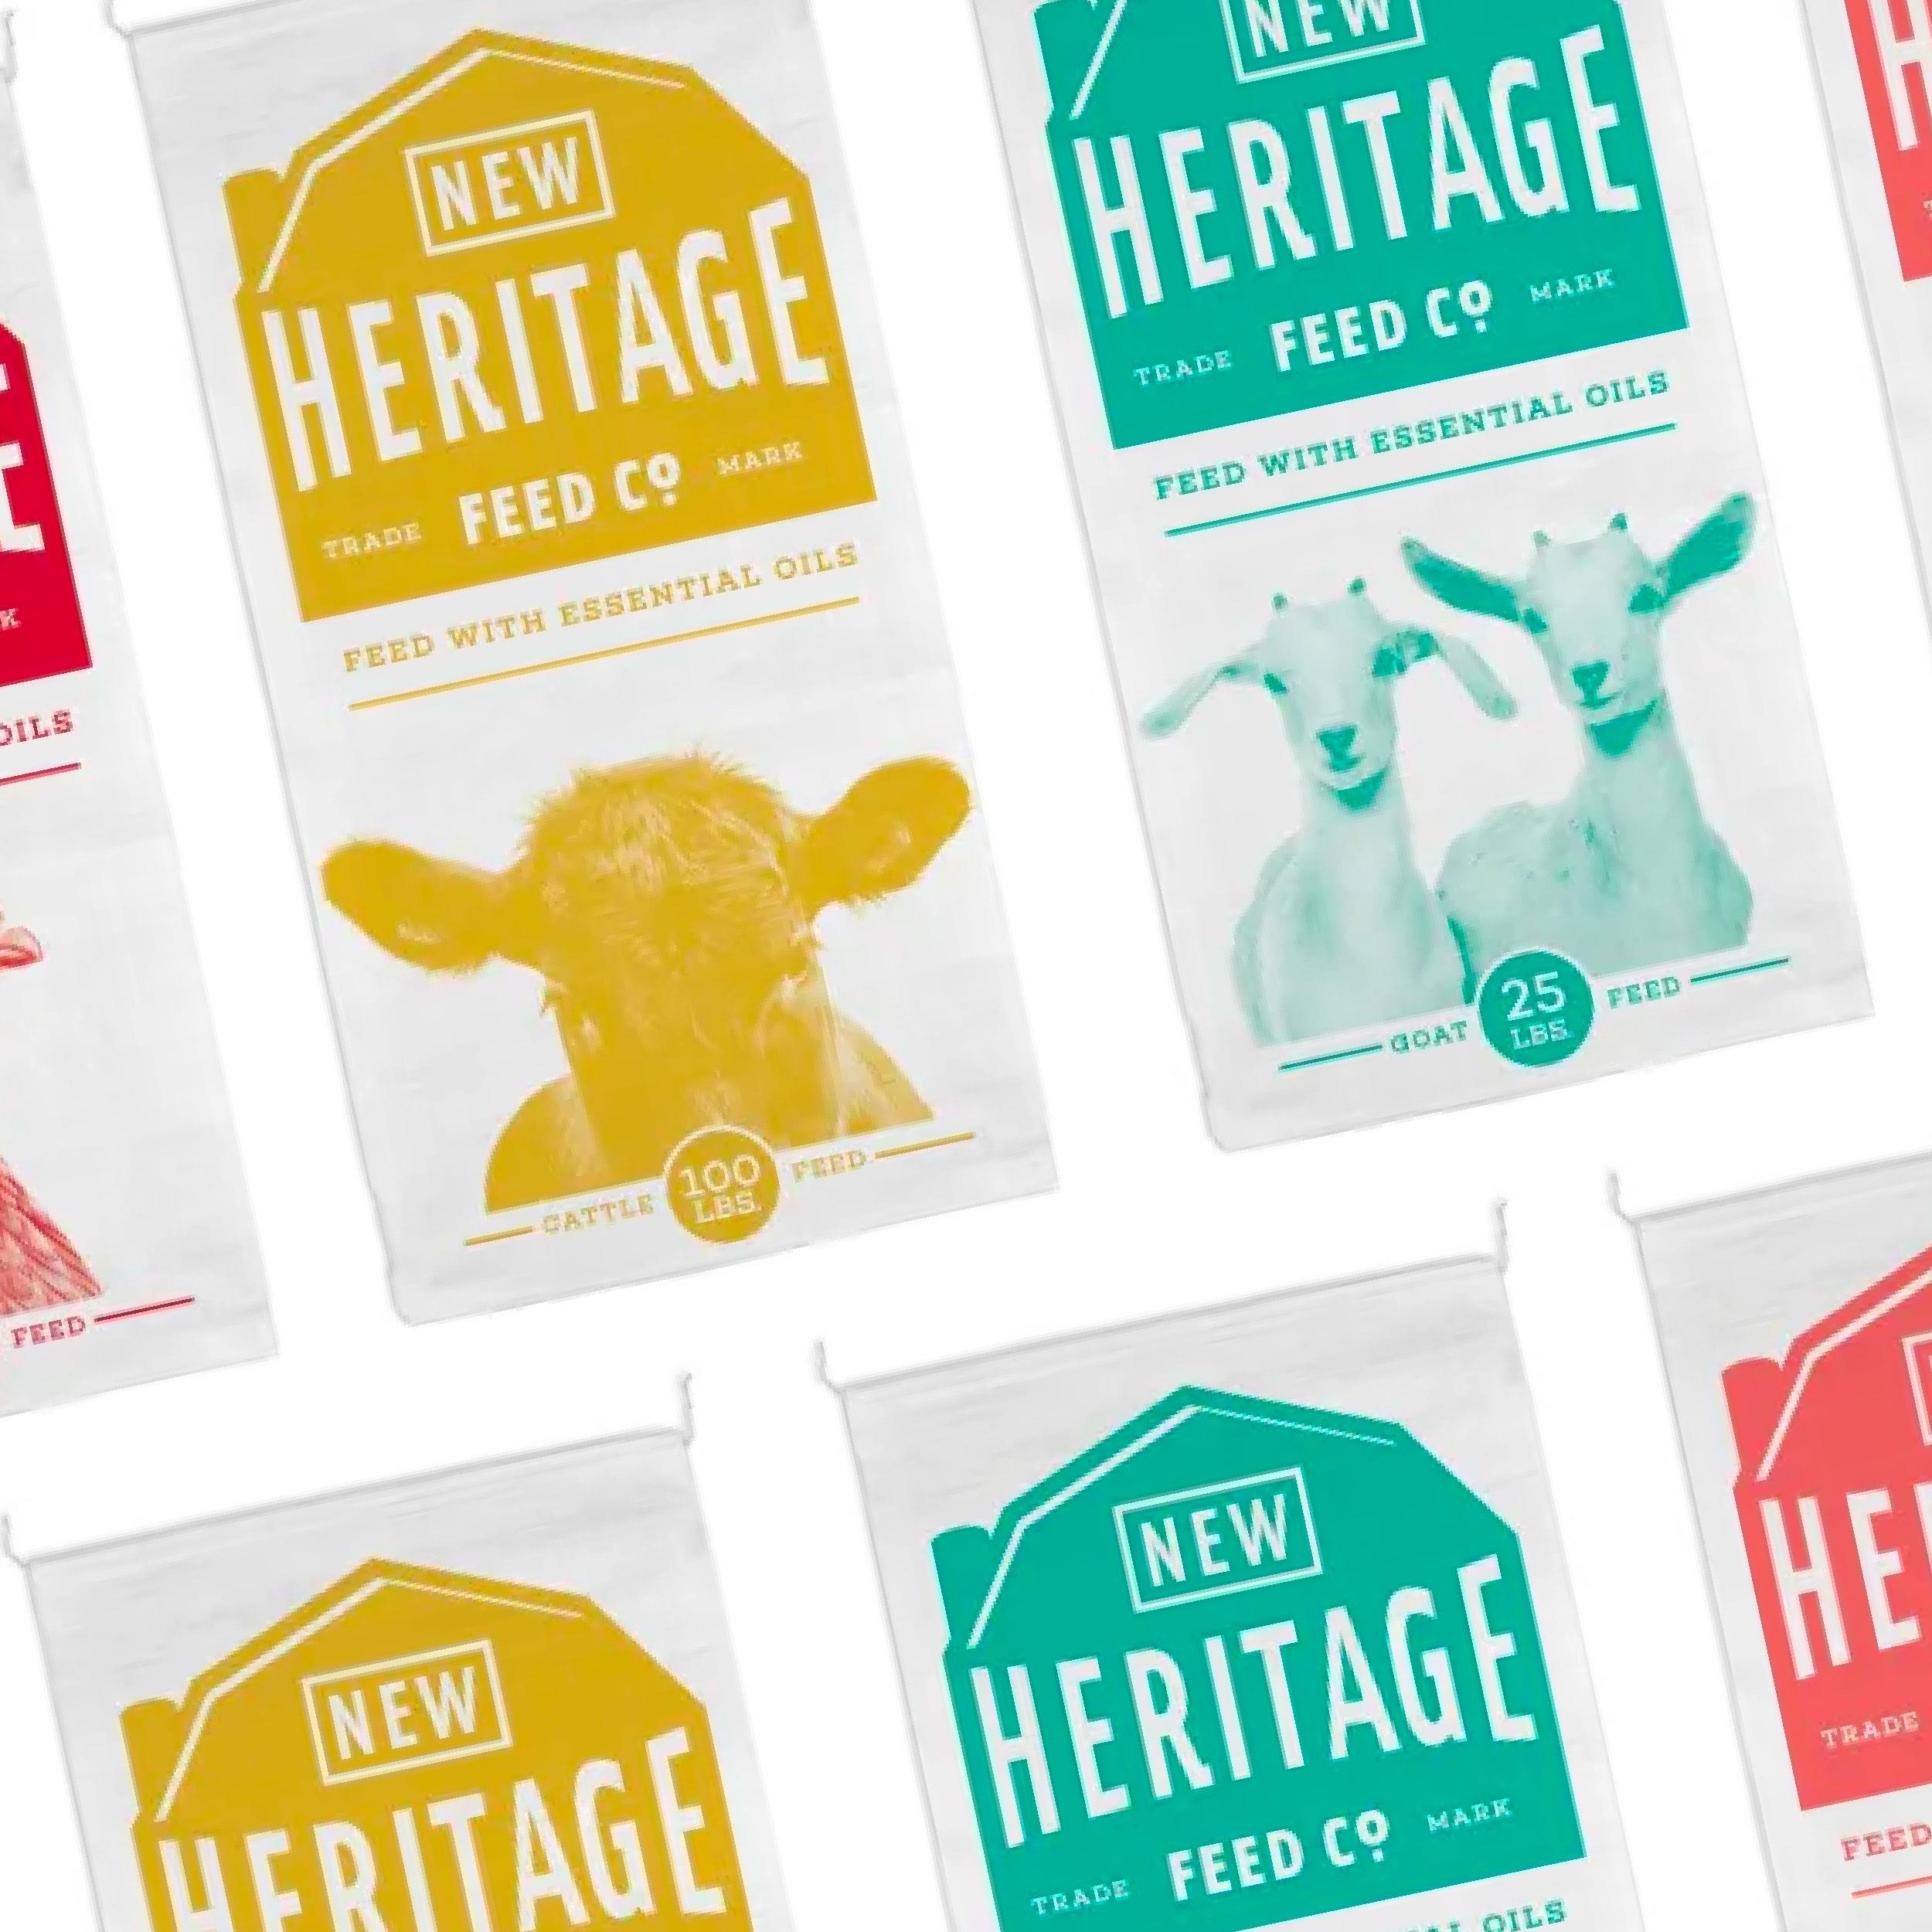 New Heritage Feed Co. - Brand & Package Design